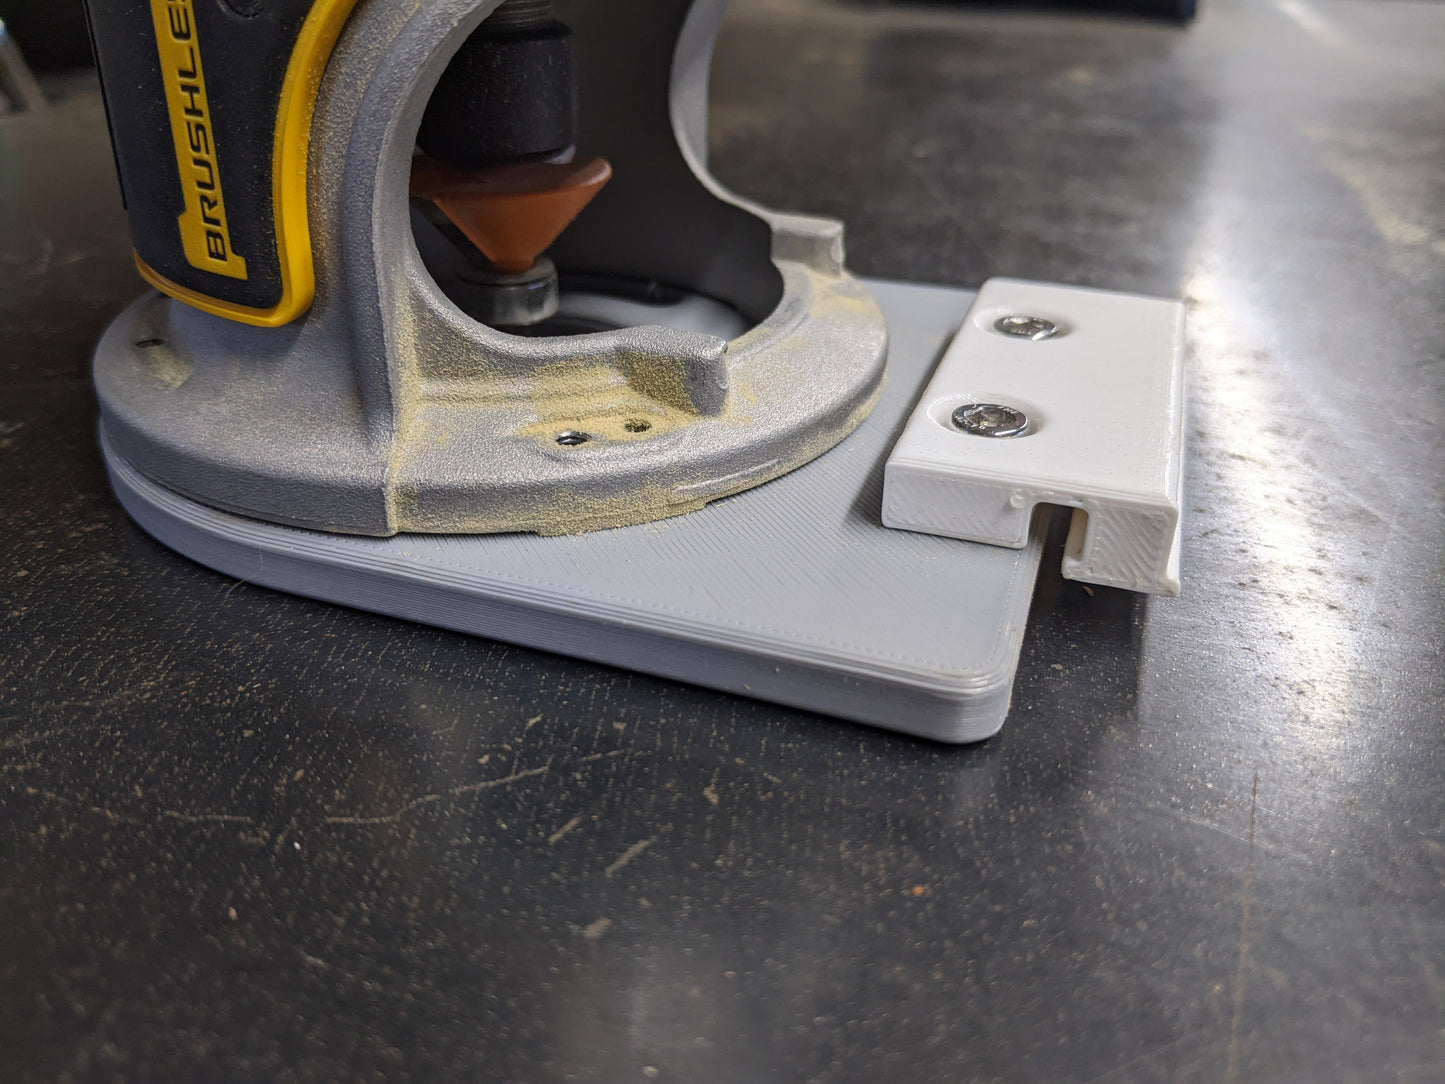 Palm Router Track Guide - Compatible with Kreg Track and Dewalt Router